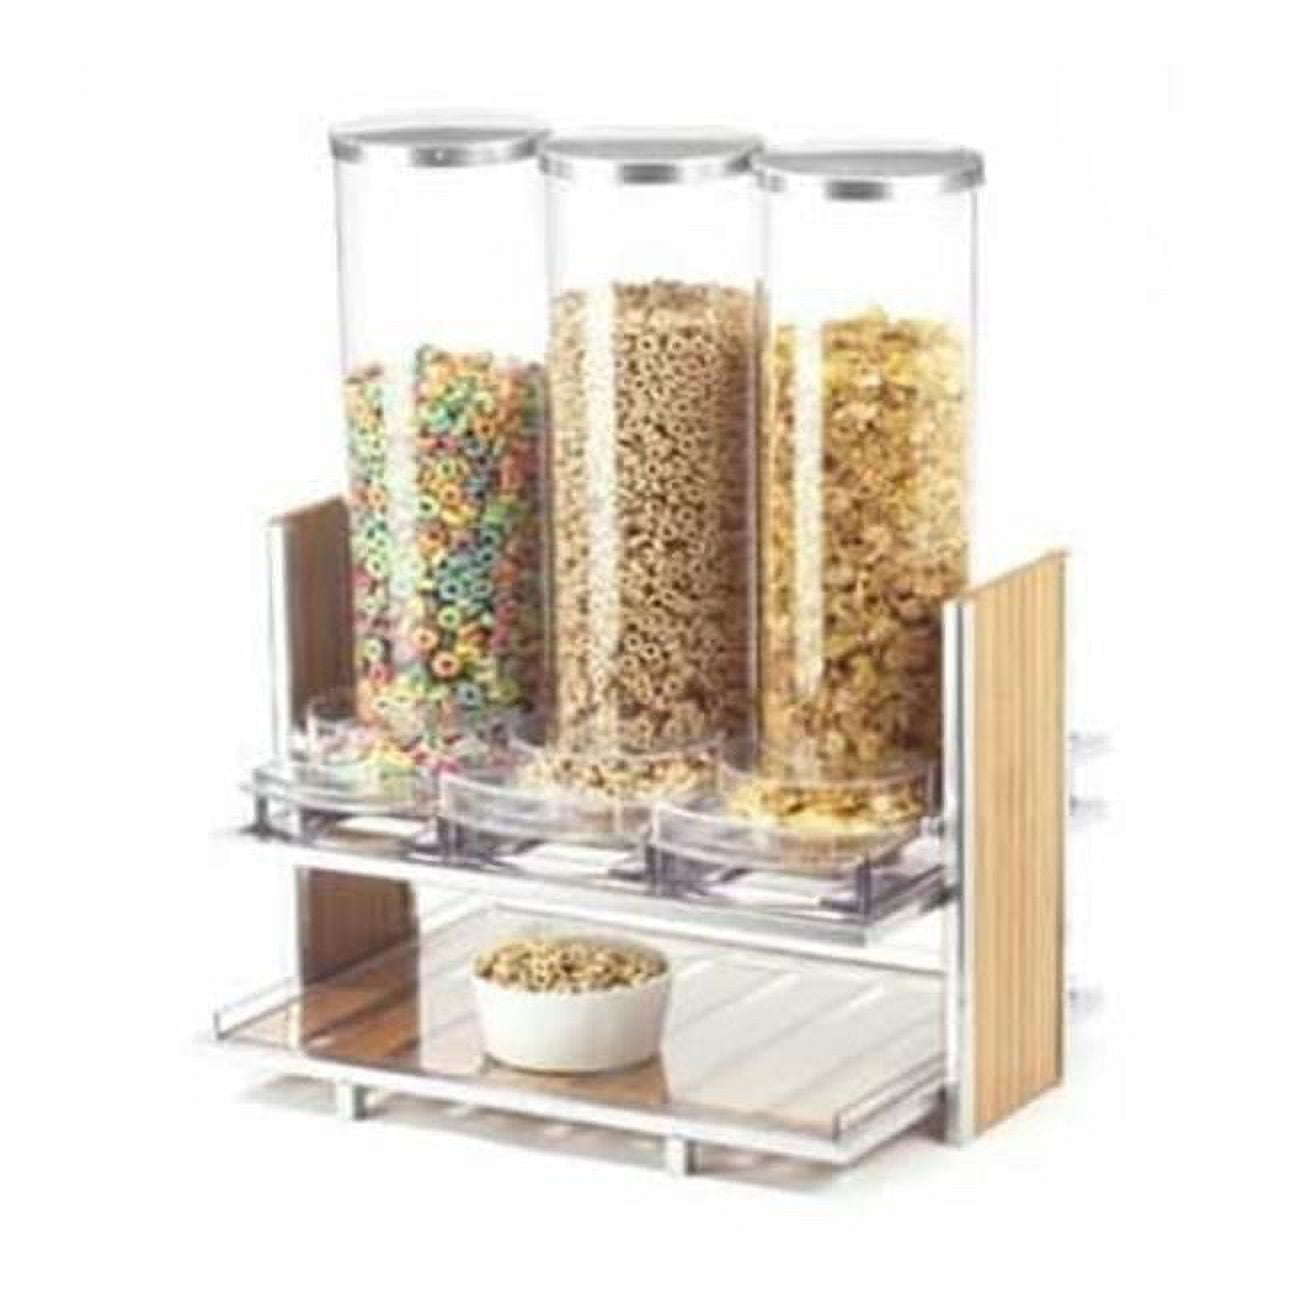 1499 Eco Modern Cereal Dispenser With Three 2.7 Ltr Bins - 18.25 X 13.25 X 24.5 In.